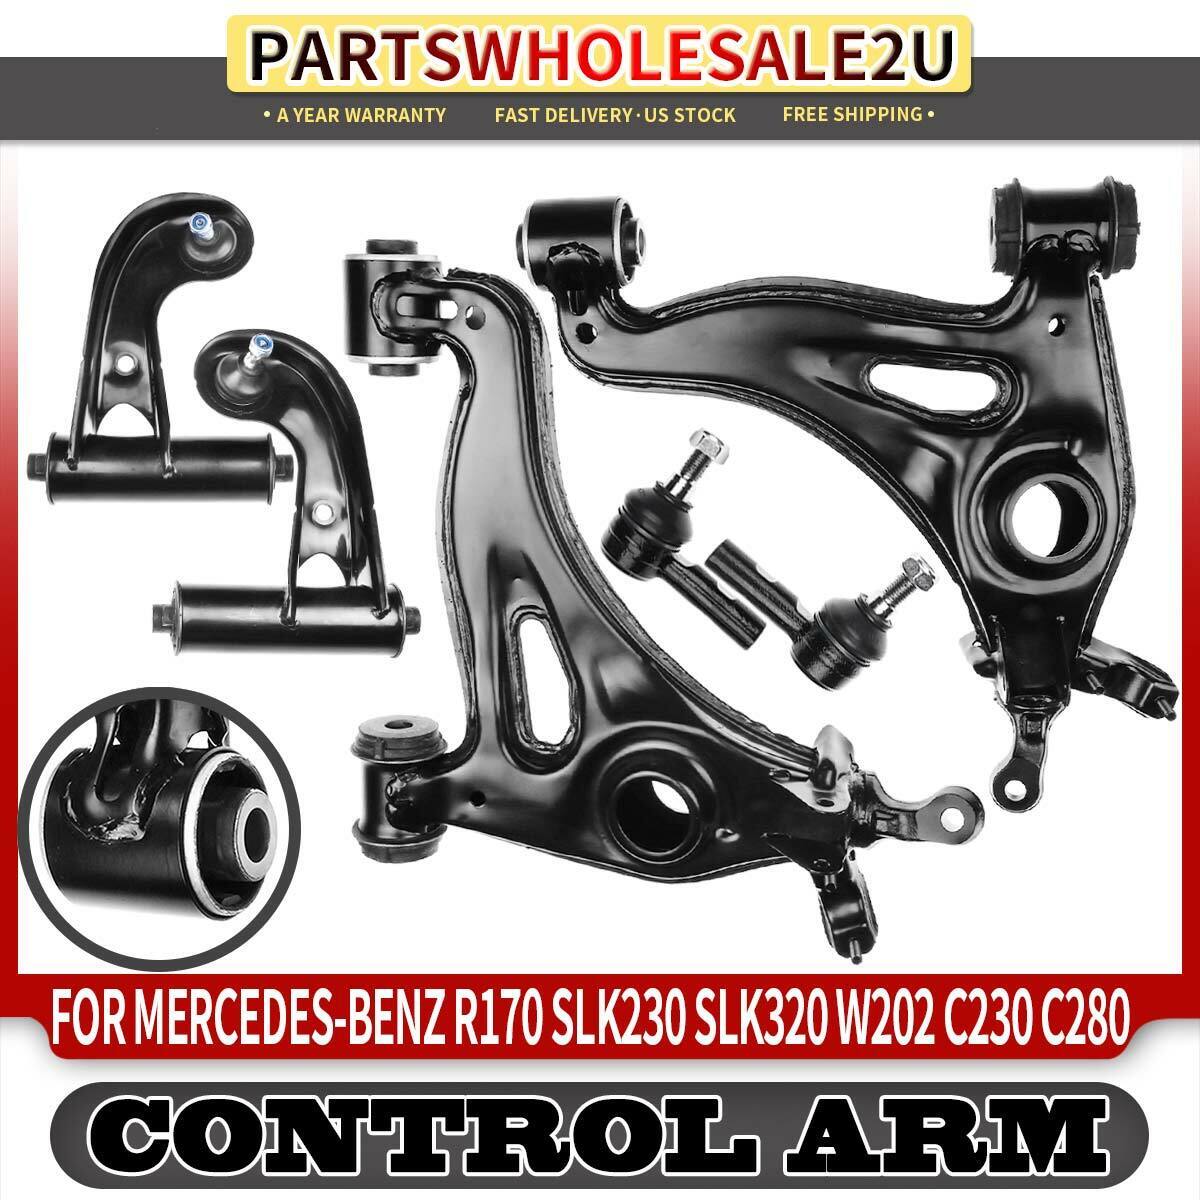 6x Front Upper Lower Control Arms for Mercedes-Benz C220 C230 SLK230 CLK55 AMG